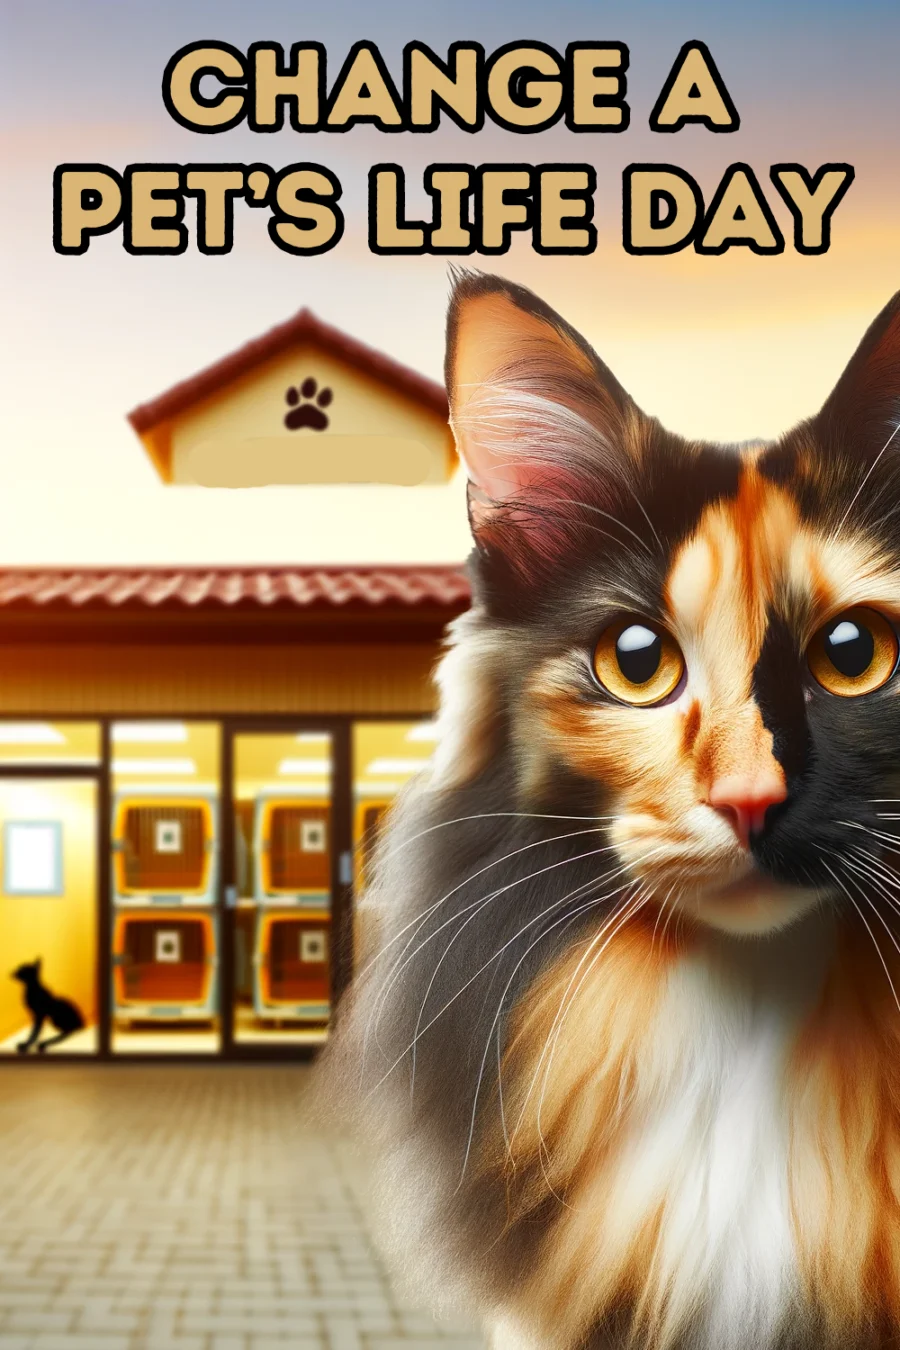 A striking and eye-catching cat in the foreground, with a distinct and contrasting coat color. The background features a warm and welcoming animal shelter, with visible kennels and a sign indicating it's a shelter.